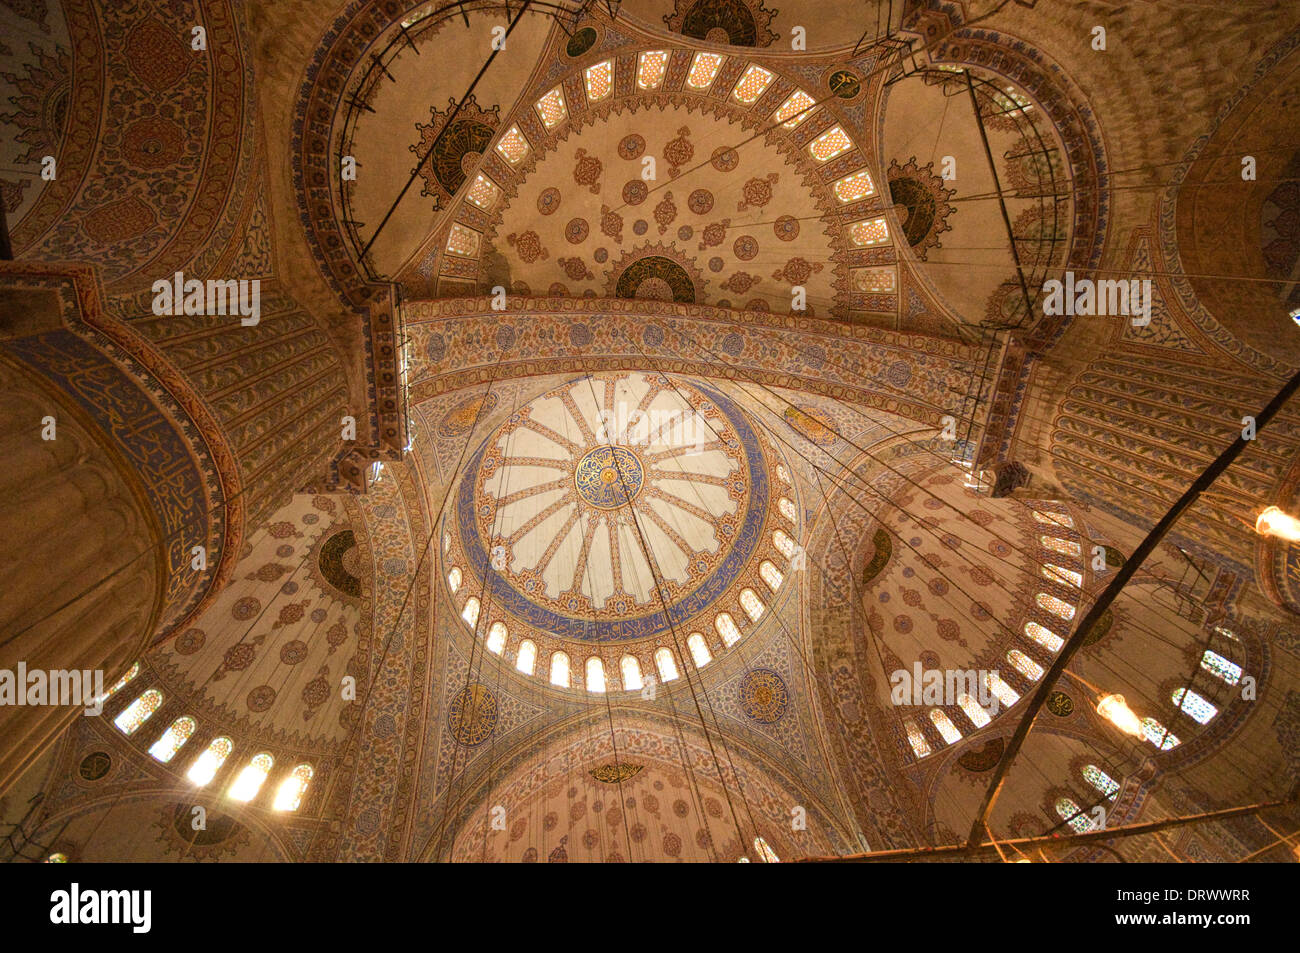 EUROPE/ASIA, Turkey, Istanbul, interior of Blue Mosque (1606-1616), constructed by Sultan Ahmet I, featuring ceiling decoration Stock Photo